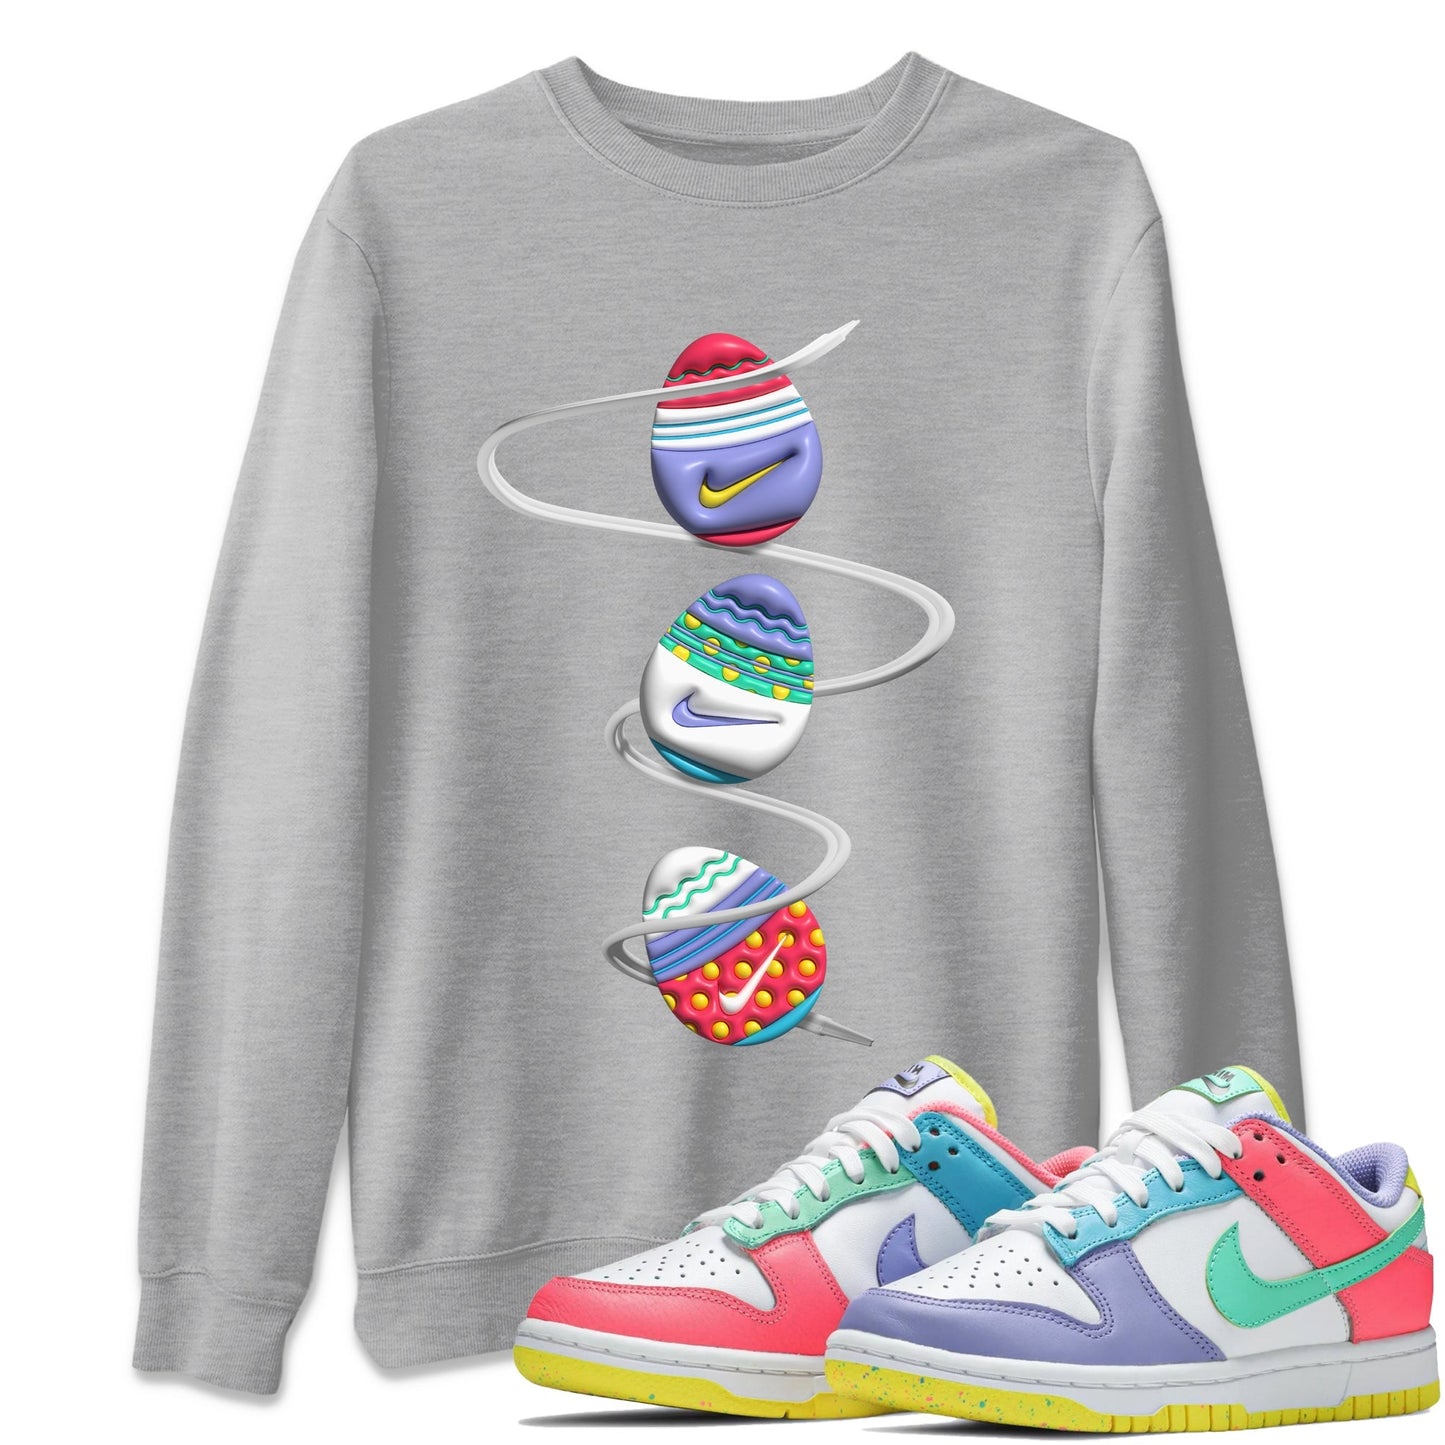 Dunk Easter Candy Sneaker Tees Drip Gear Zone 3D Easter Eggs Sneaker Tees Nike Easter Shirt Unisex Shirts Heather Grey 1